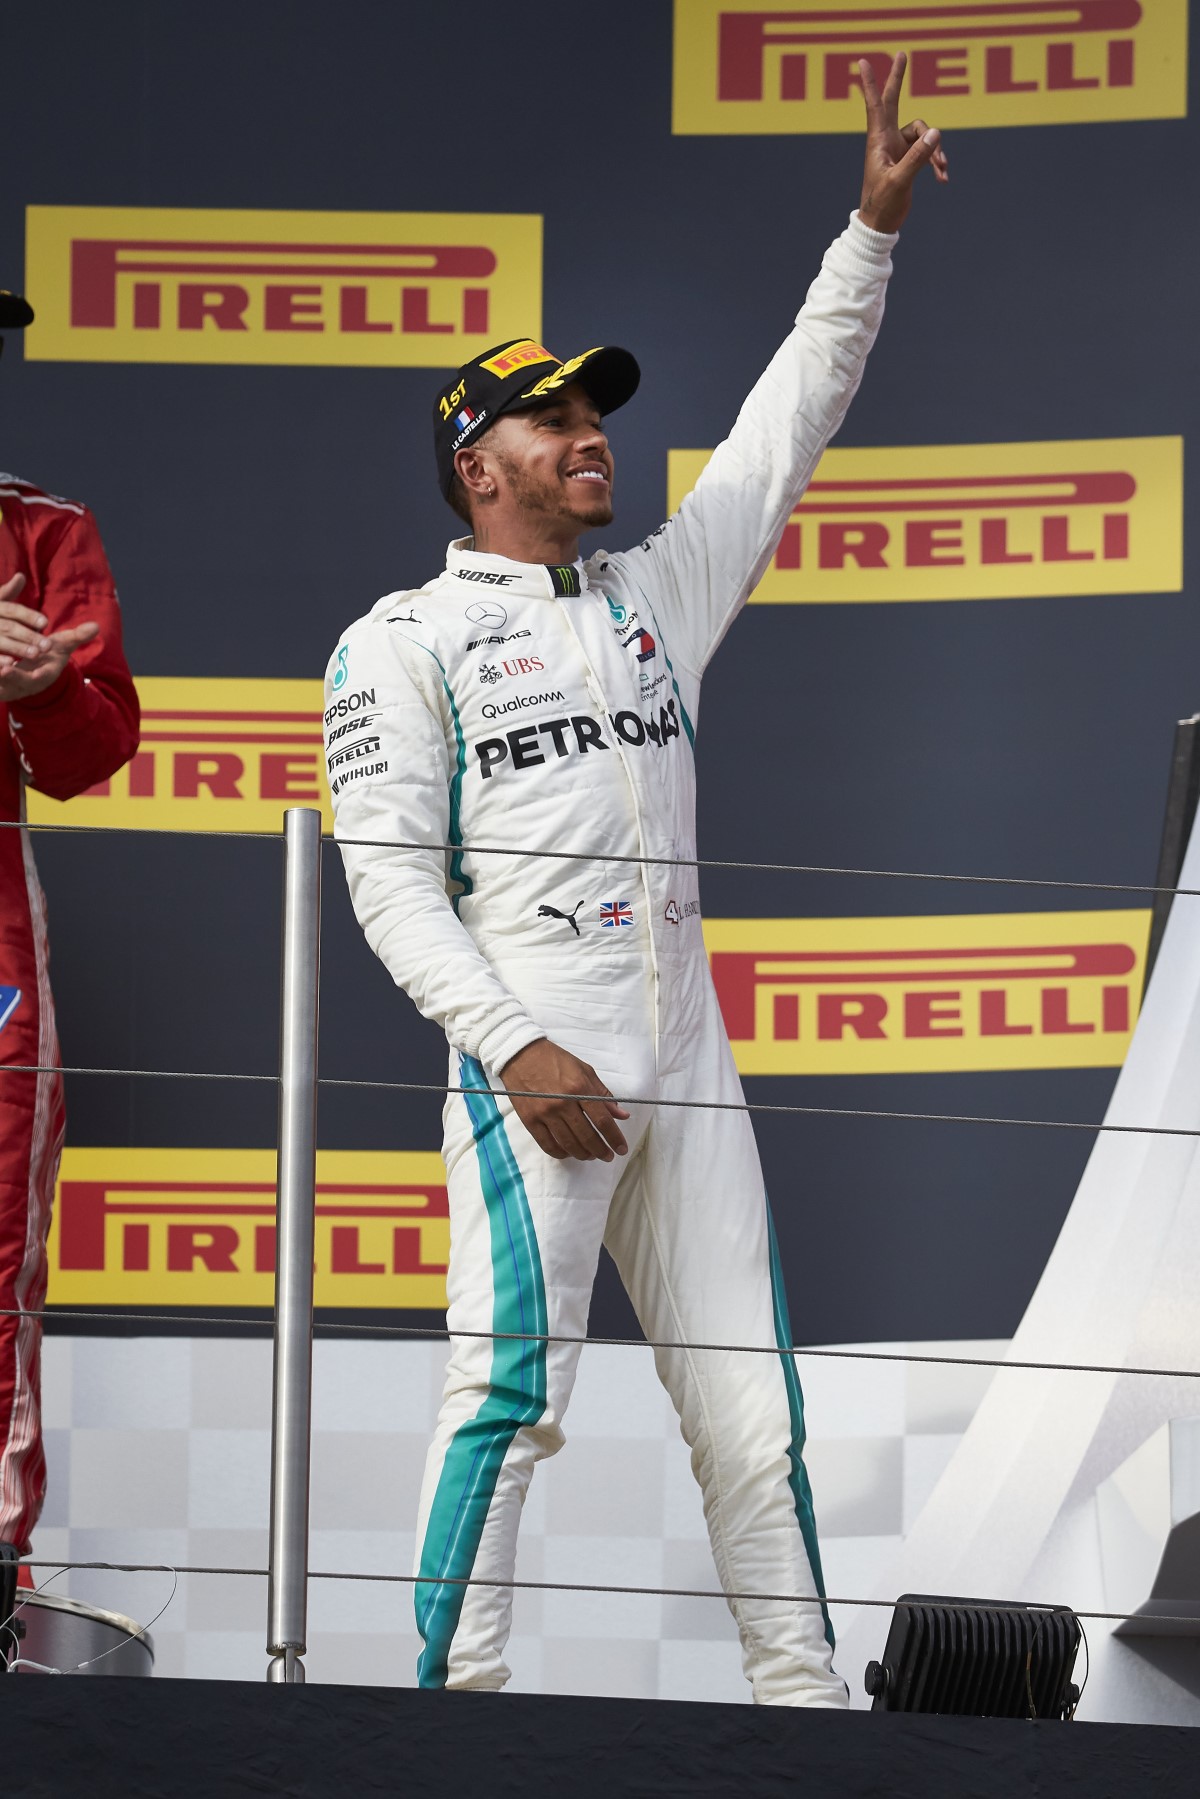 Hamilton used Mercedes newfound power to dominate in France